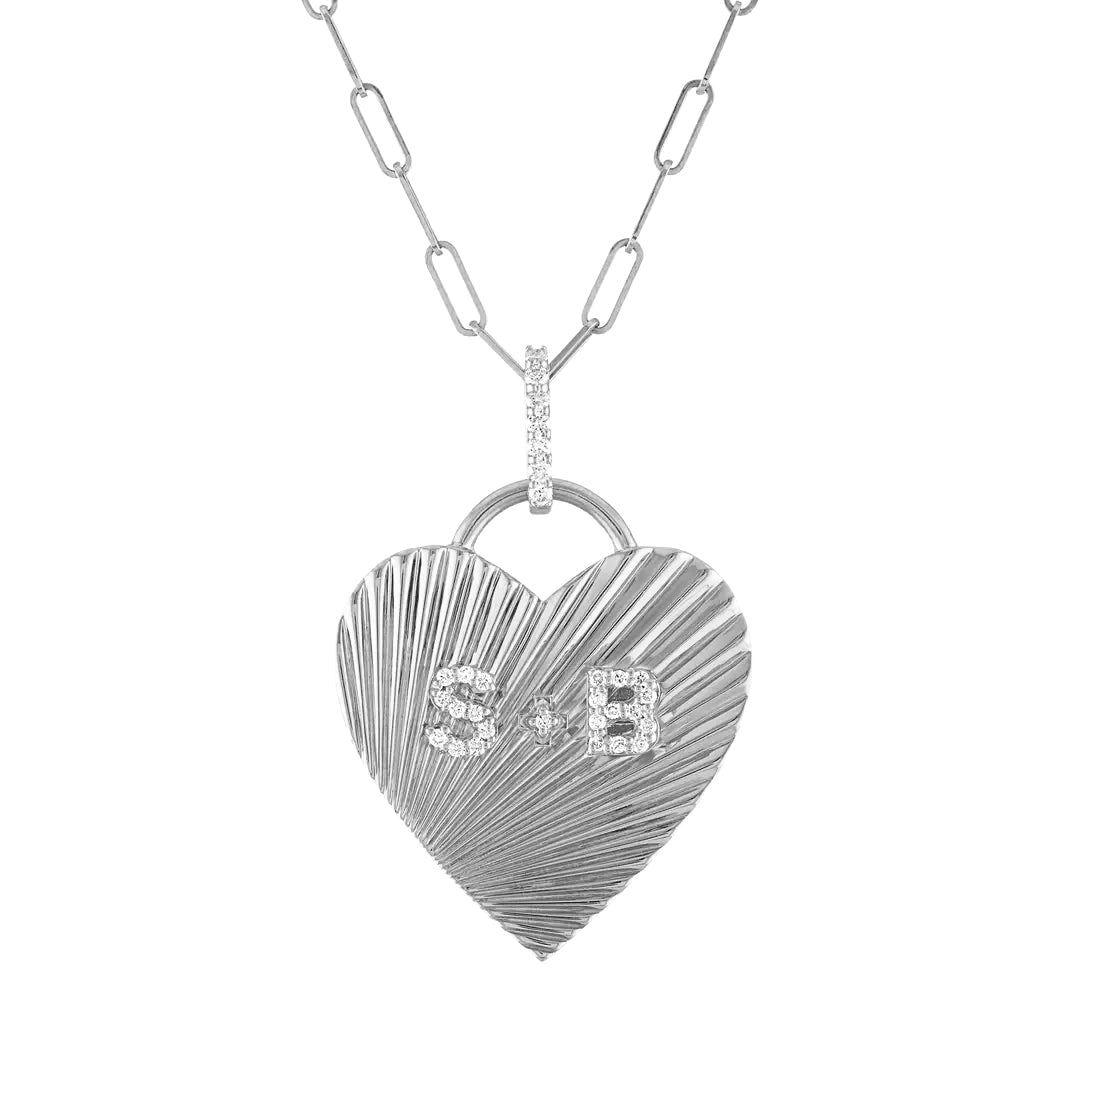 The Love Charm with Elshane Chain